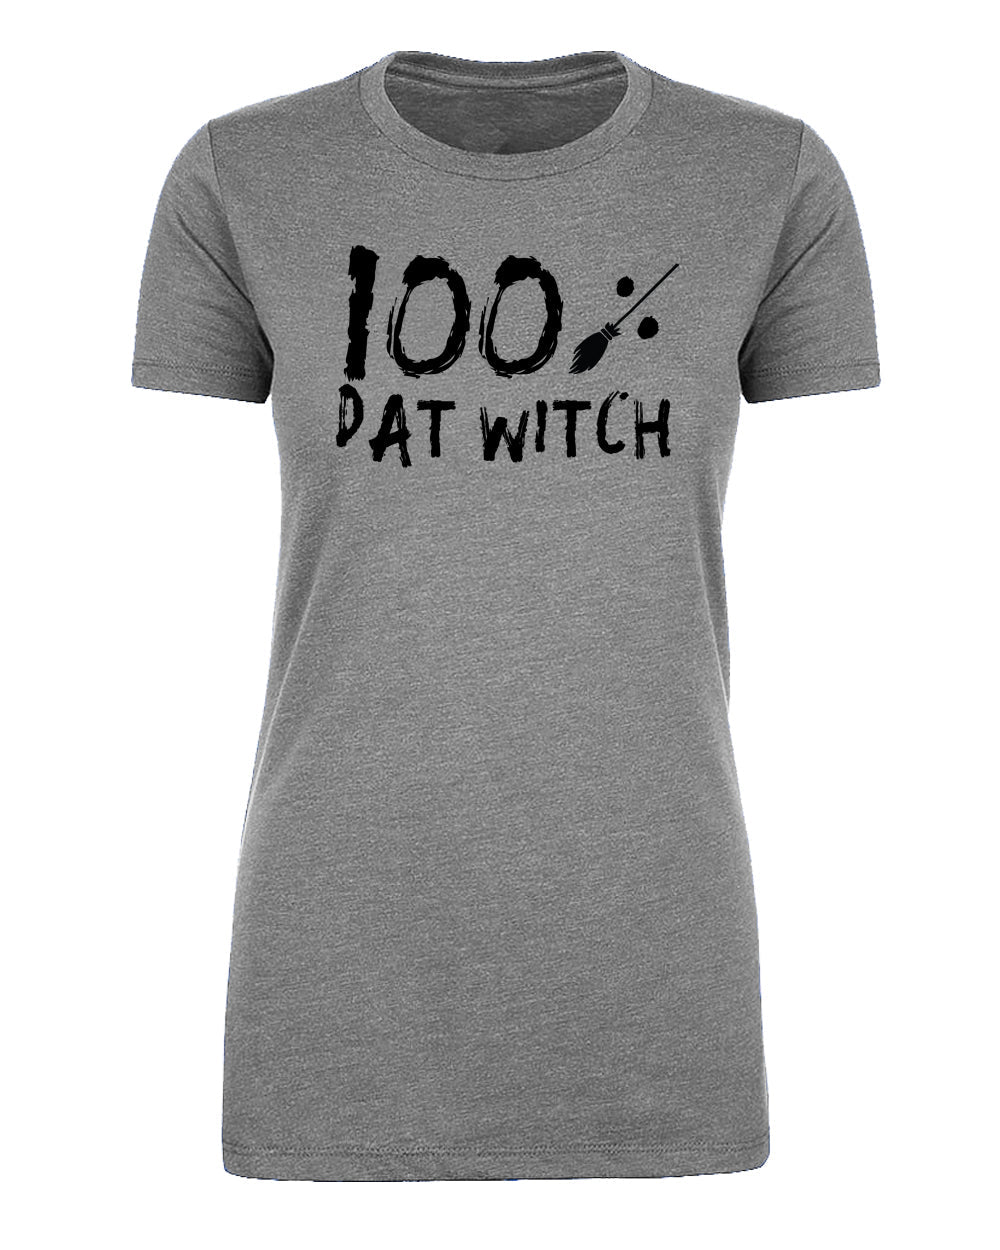 Shirt - 100% Dat Witch T-shirts, Women's Graphic Tees, Funny Halloween Shirts Womens